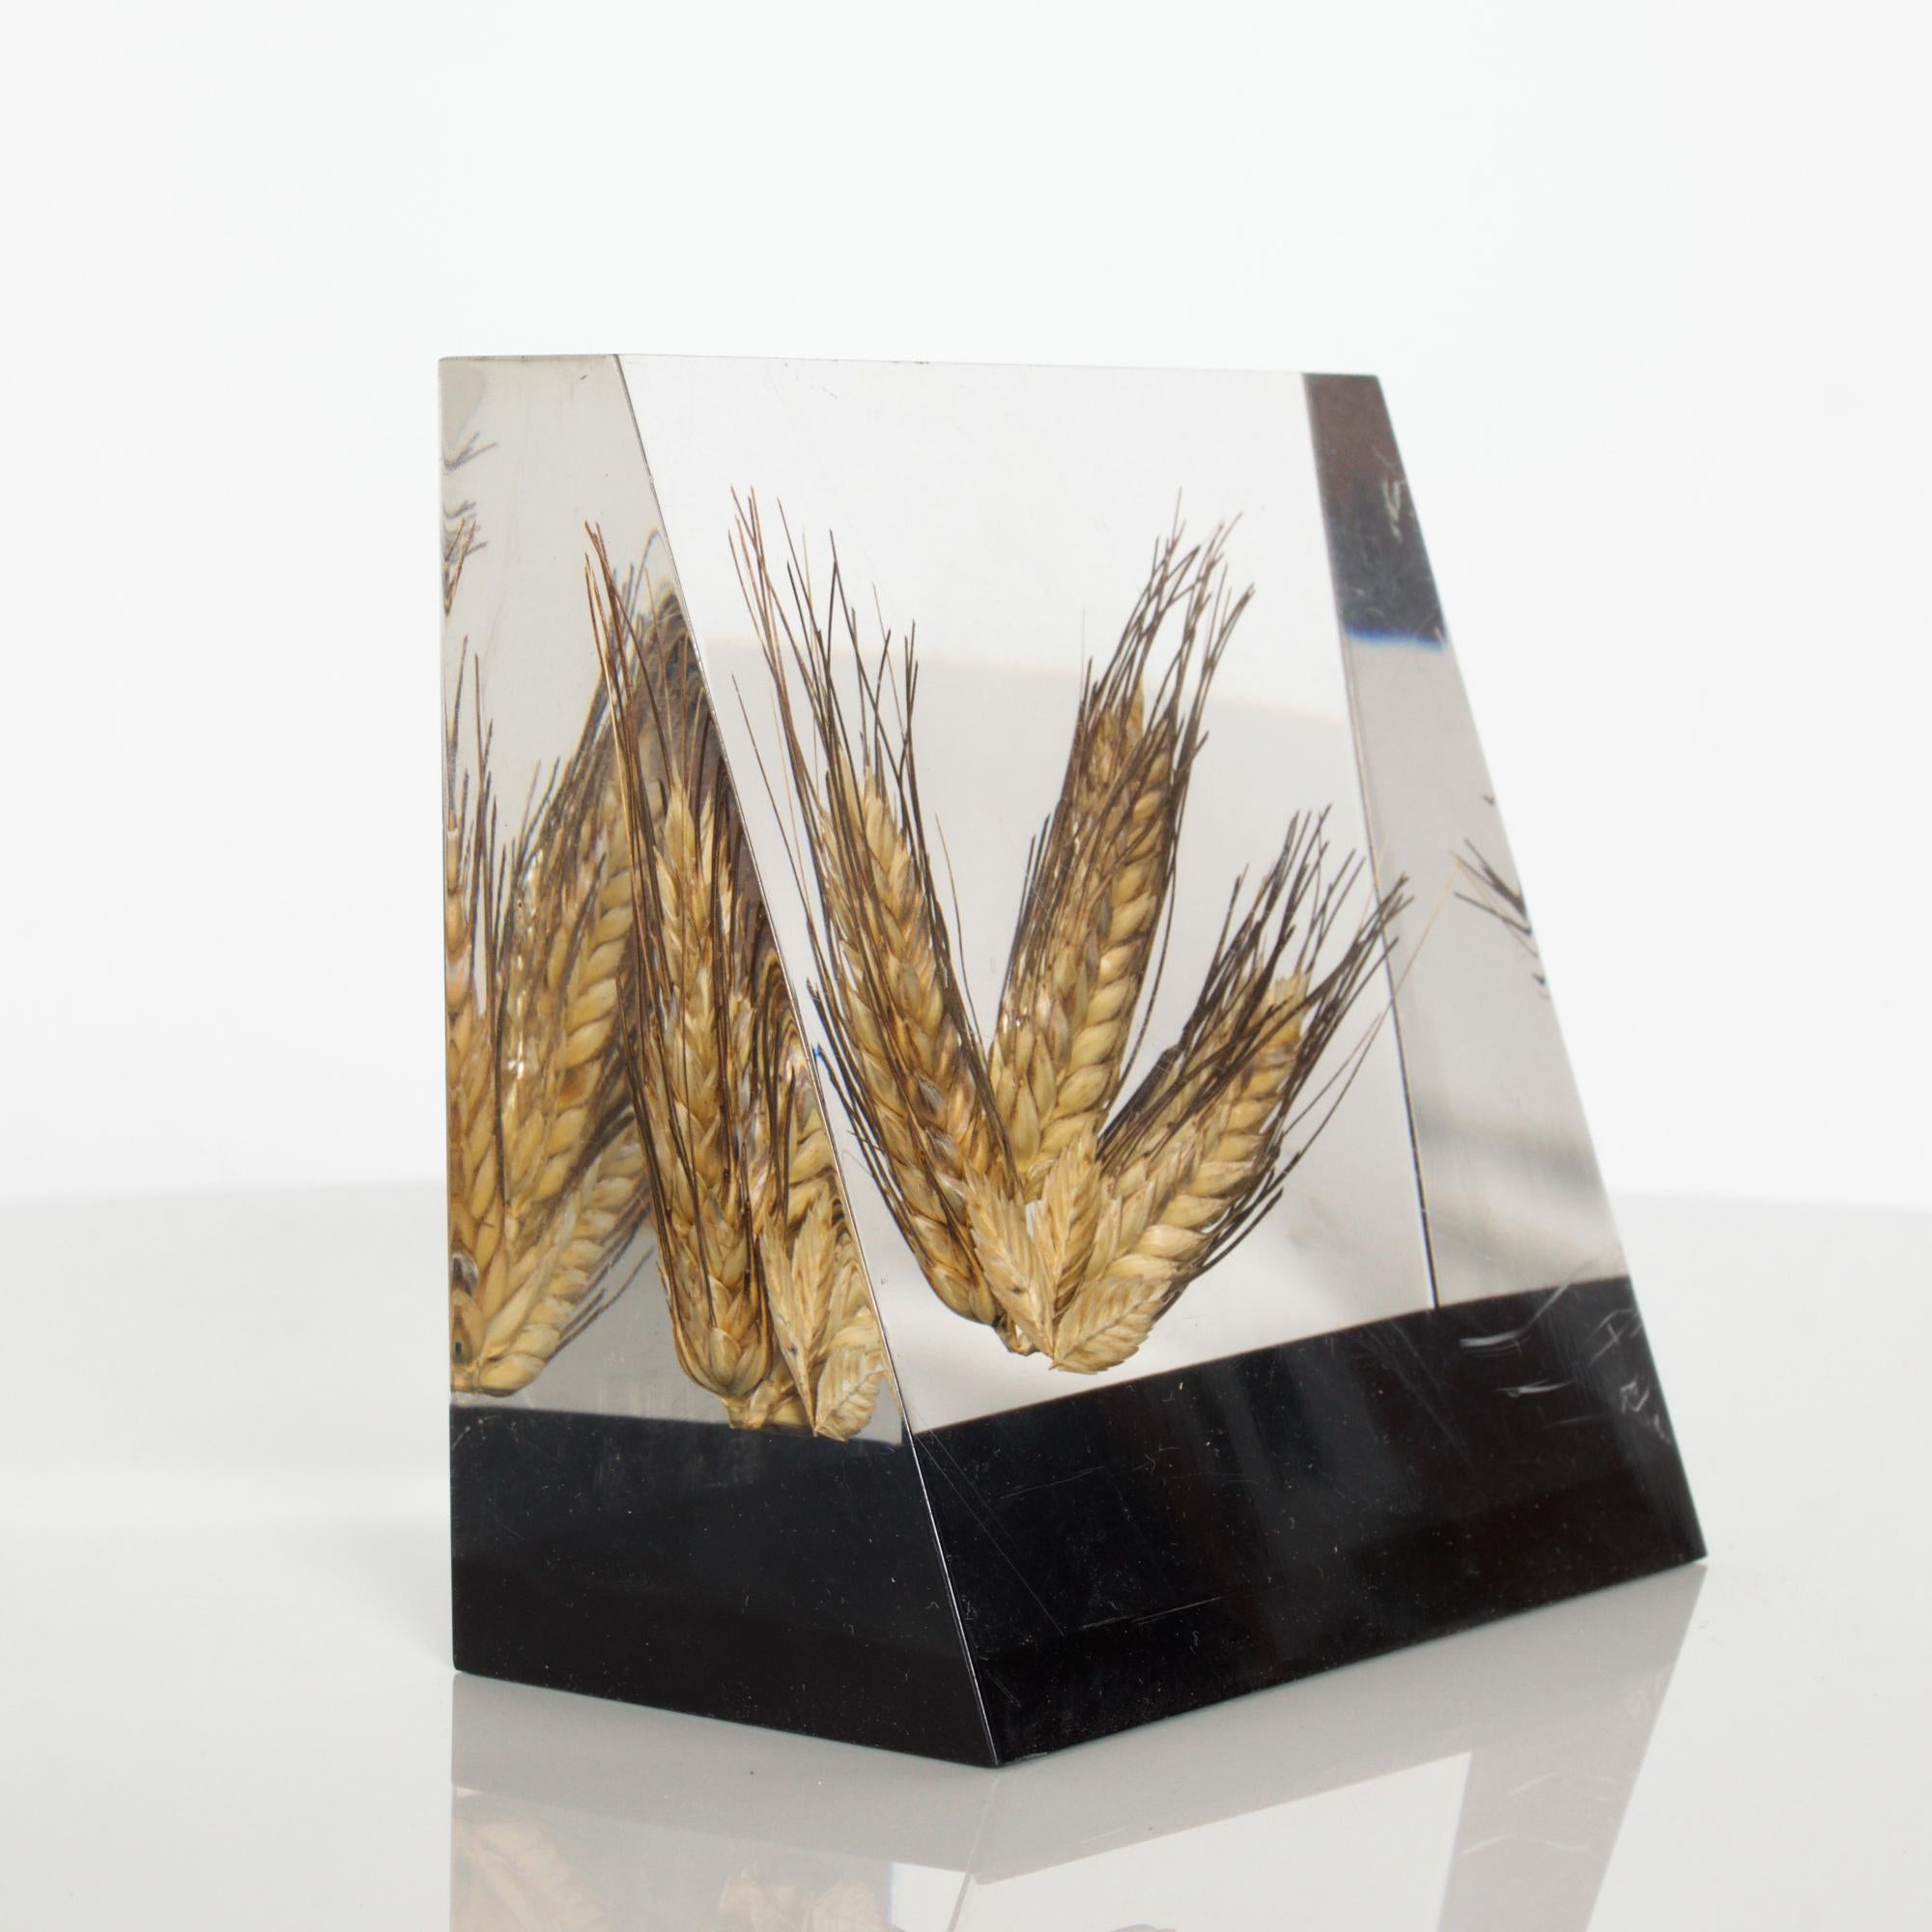 Transparent brilliantly clear single bookend solid block in acrylic with suspended wheat barley on wide black base, circa 1980s
Bookend or decorative accessory. No label present.
(Reminiscent of Shiro Kuramata and his acclaimed Miss Blanche Chair